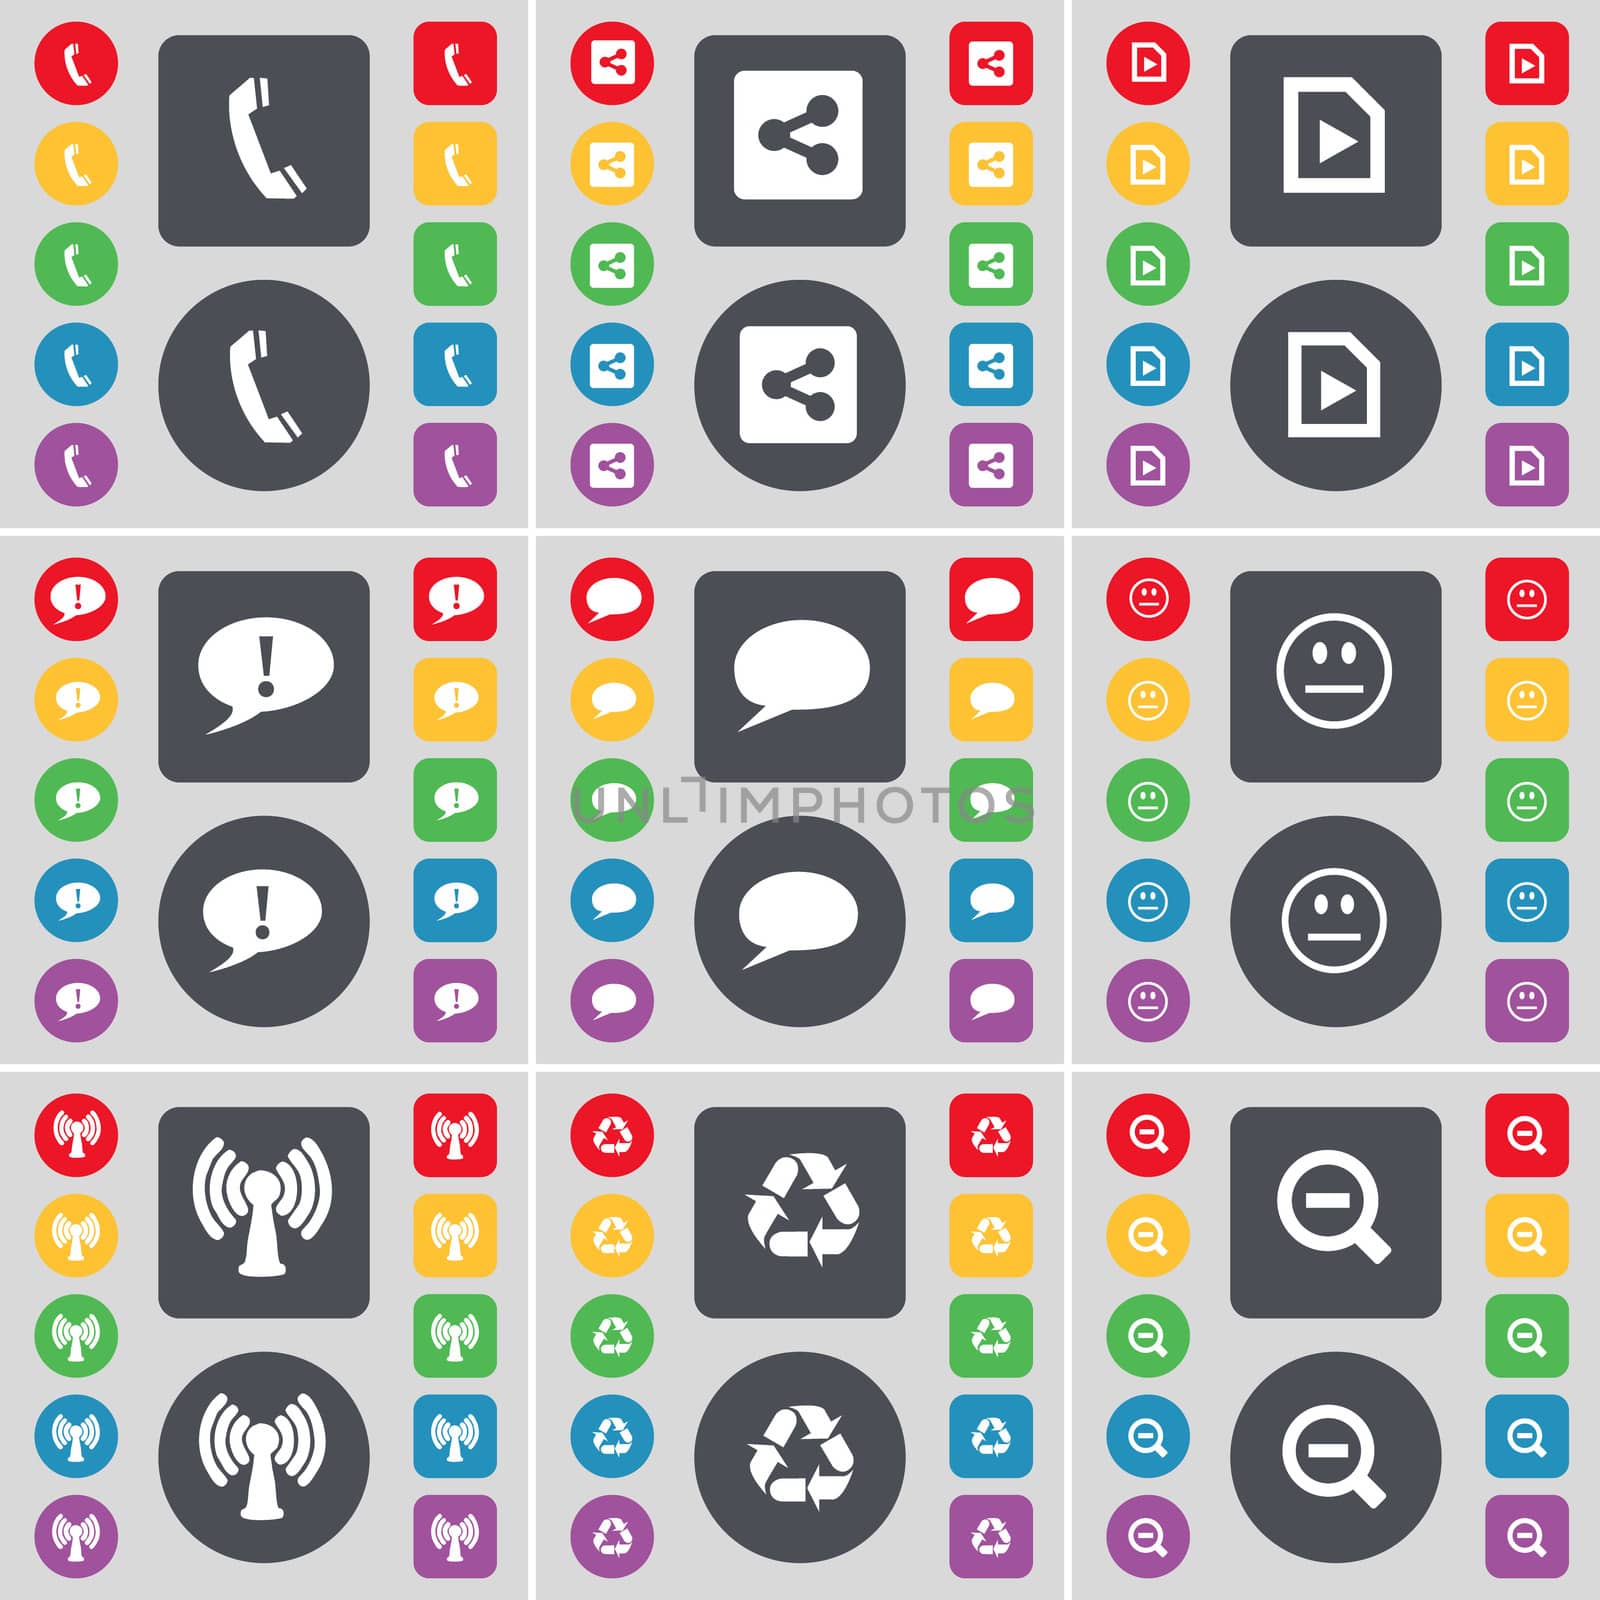 Receiver, Share, Media file, Chat bubble, Smile, Wi-Fi, Recycling, Minus icon symbol. A large set of flat, colored buttons for your design. illustration